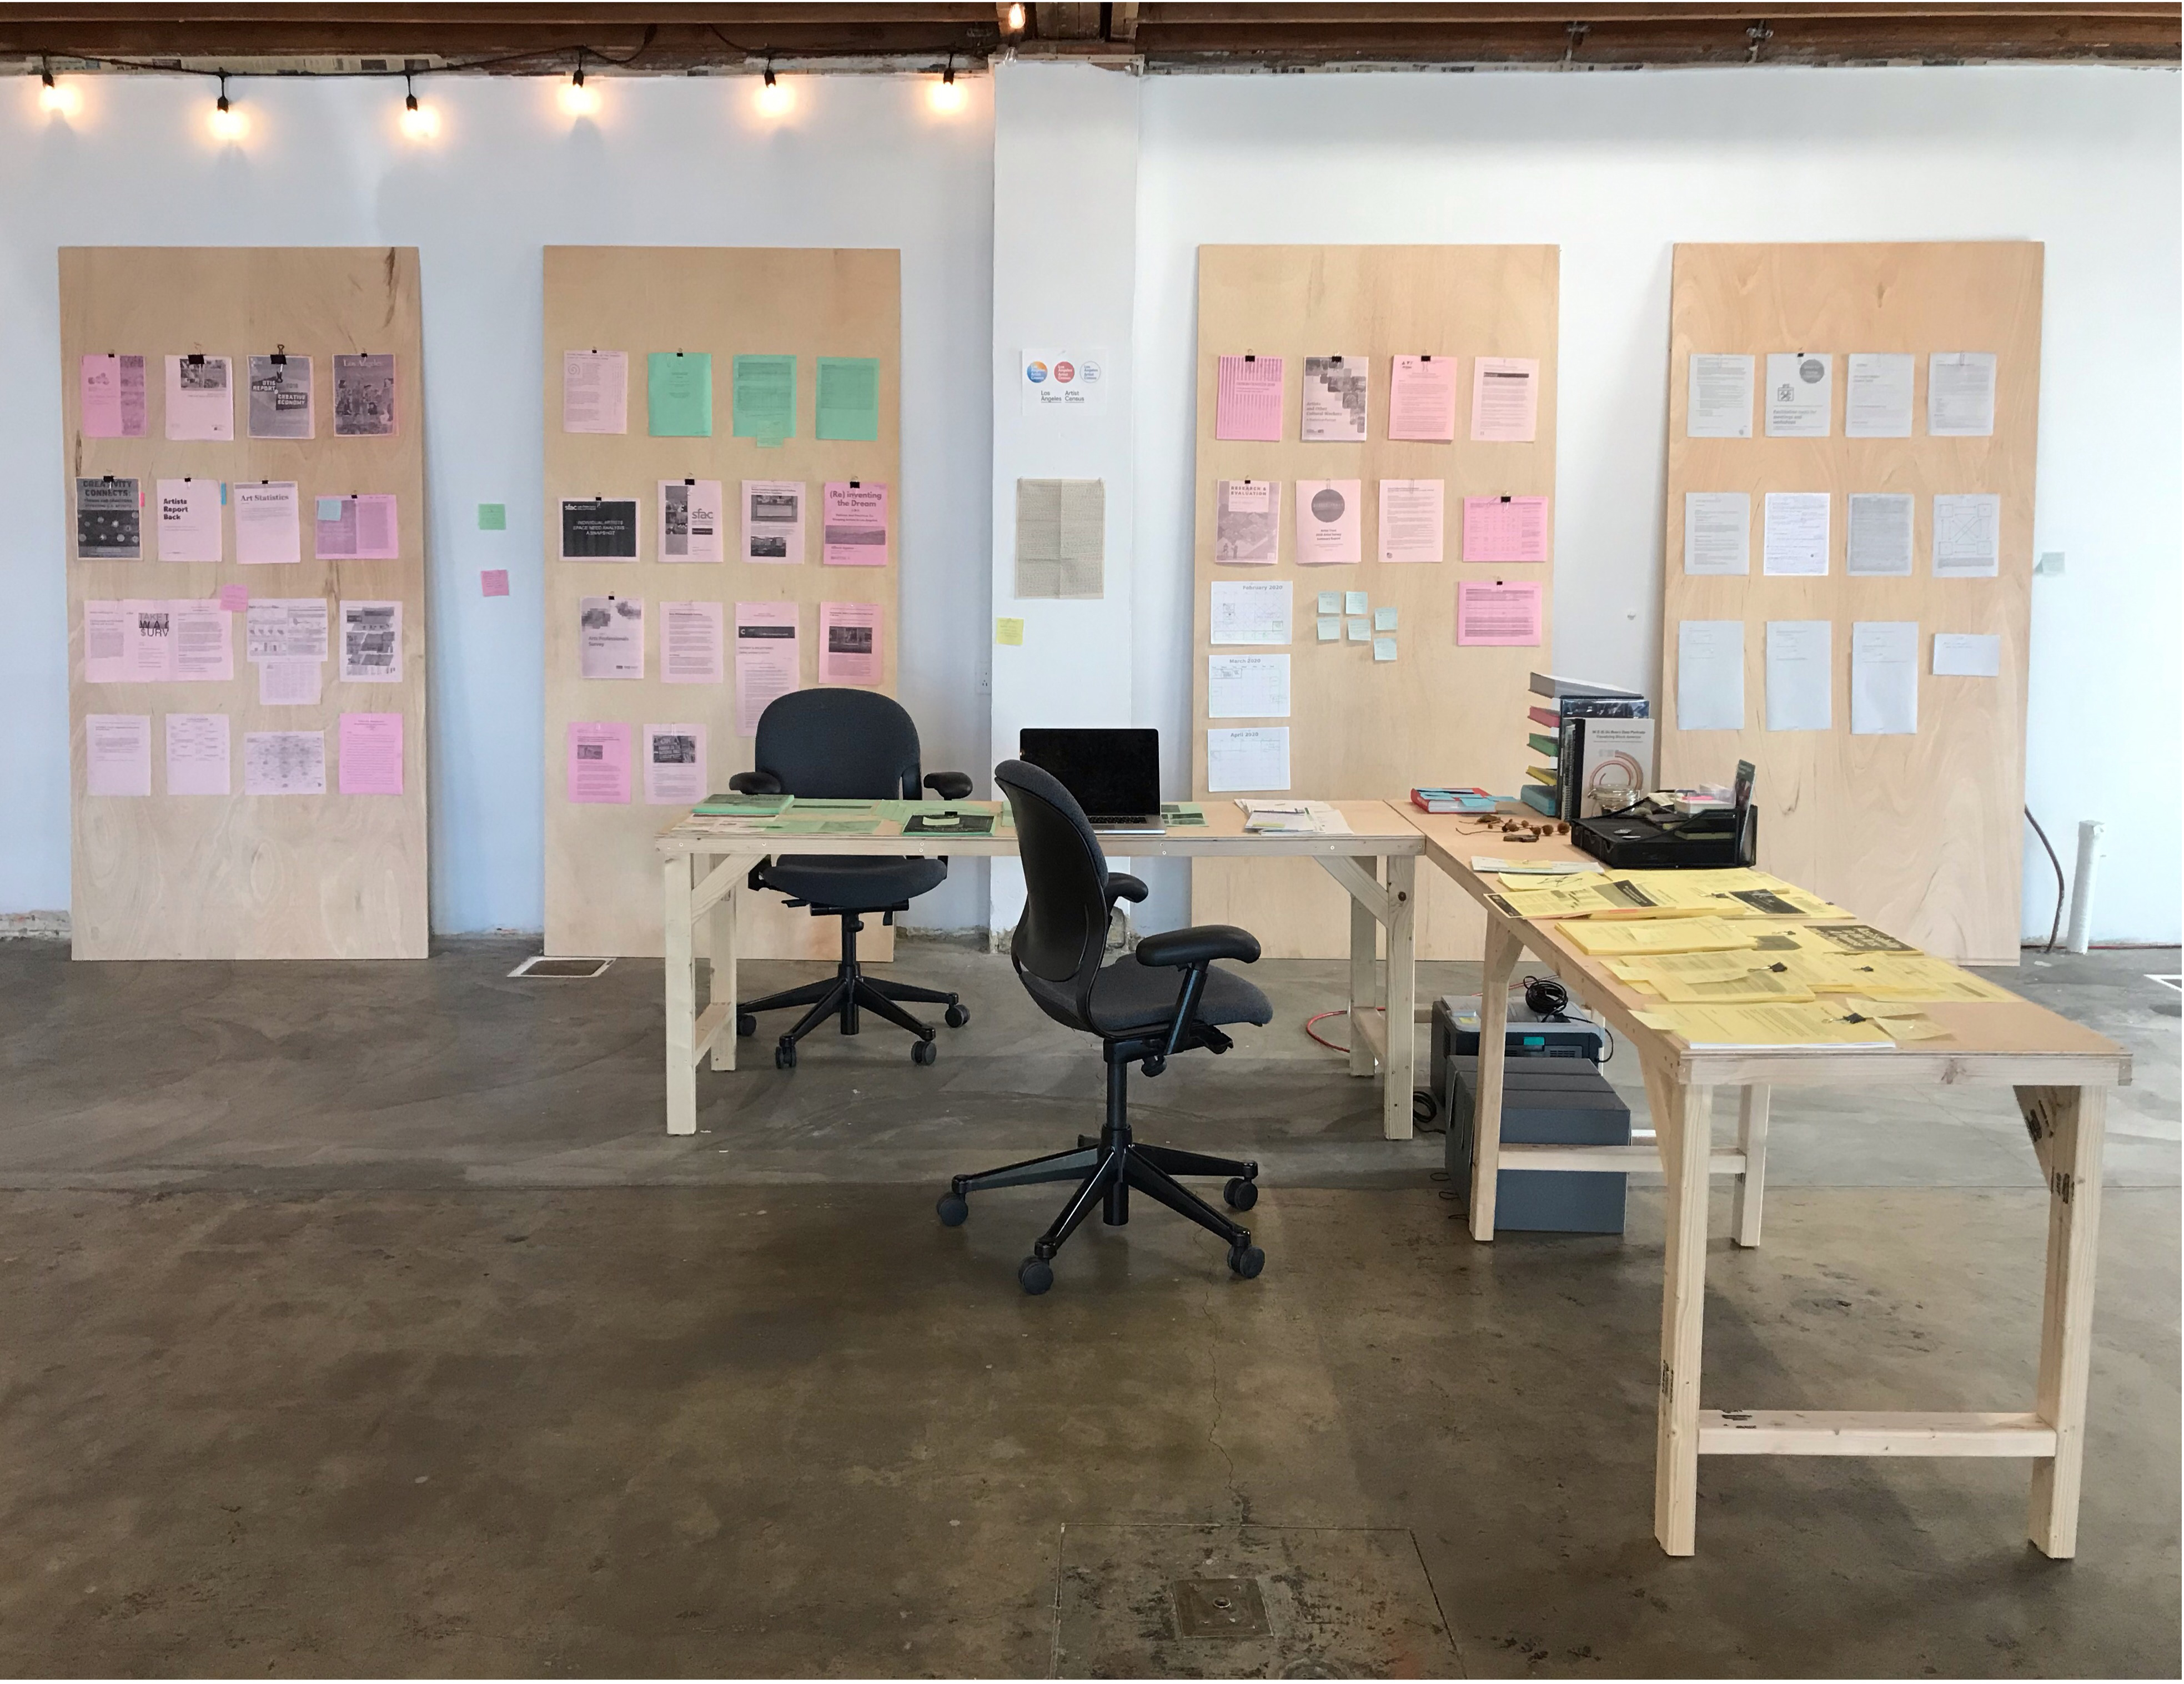 Los Angeles Artist Census Office at the ICA LA (2020)